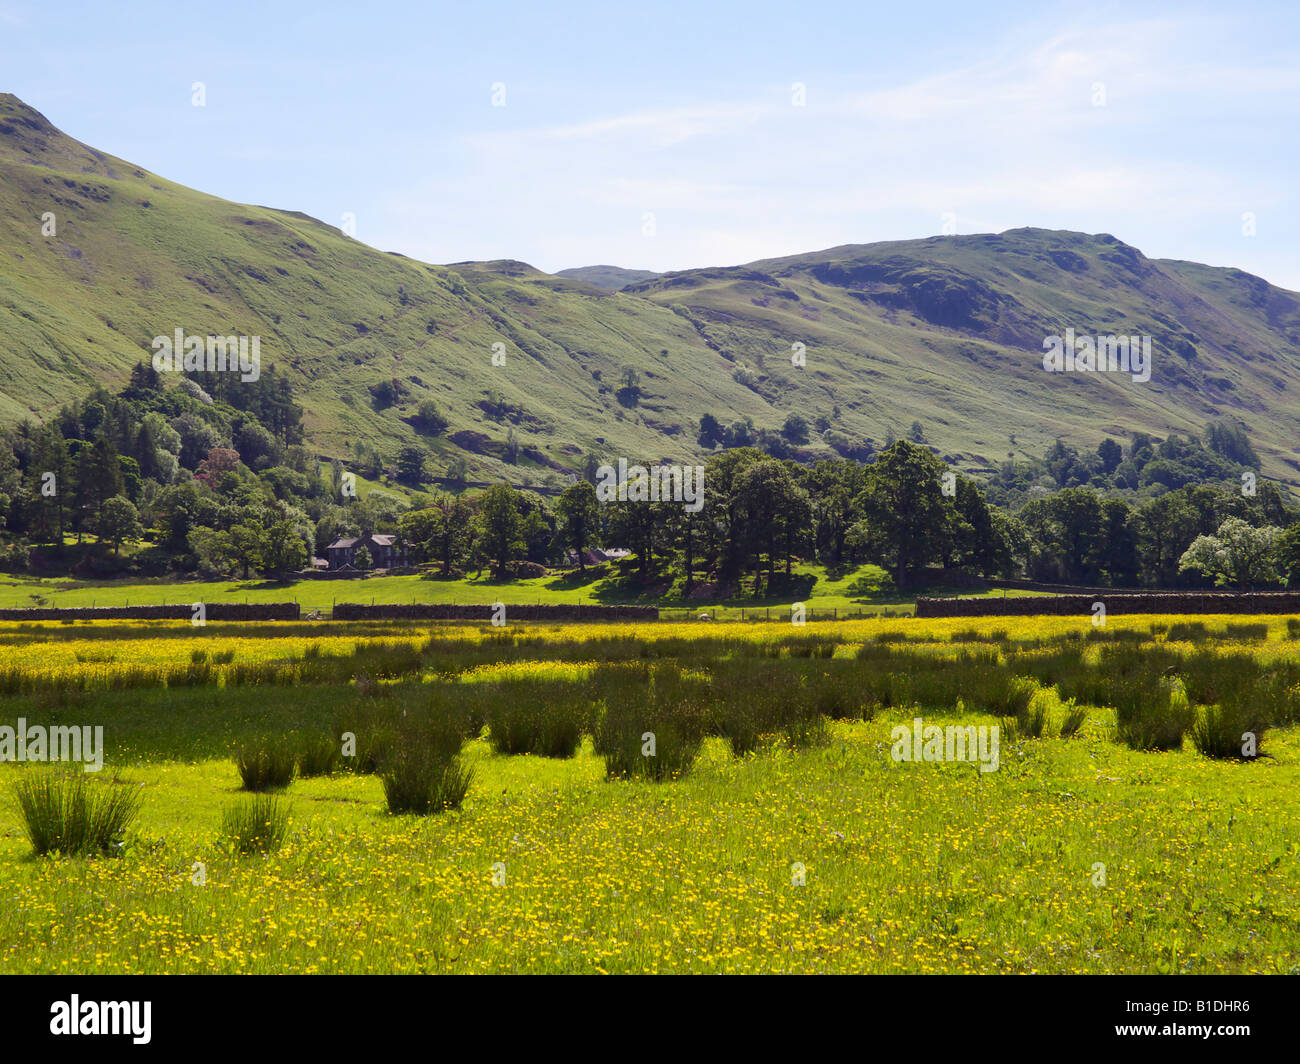 Summer evening at Patterdale near Ullswater in the English Lake District Stock Photo